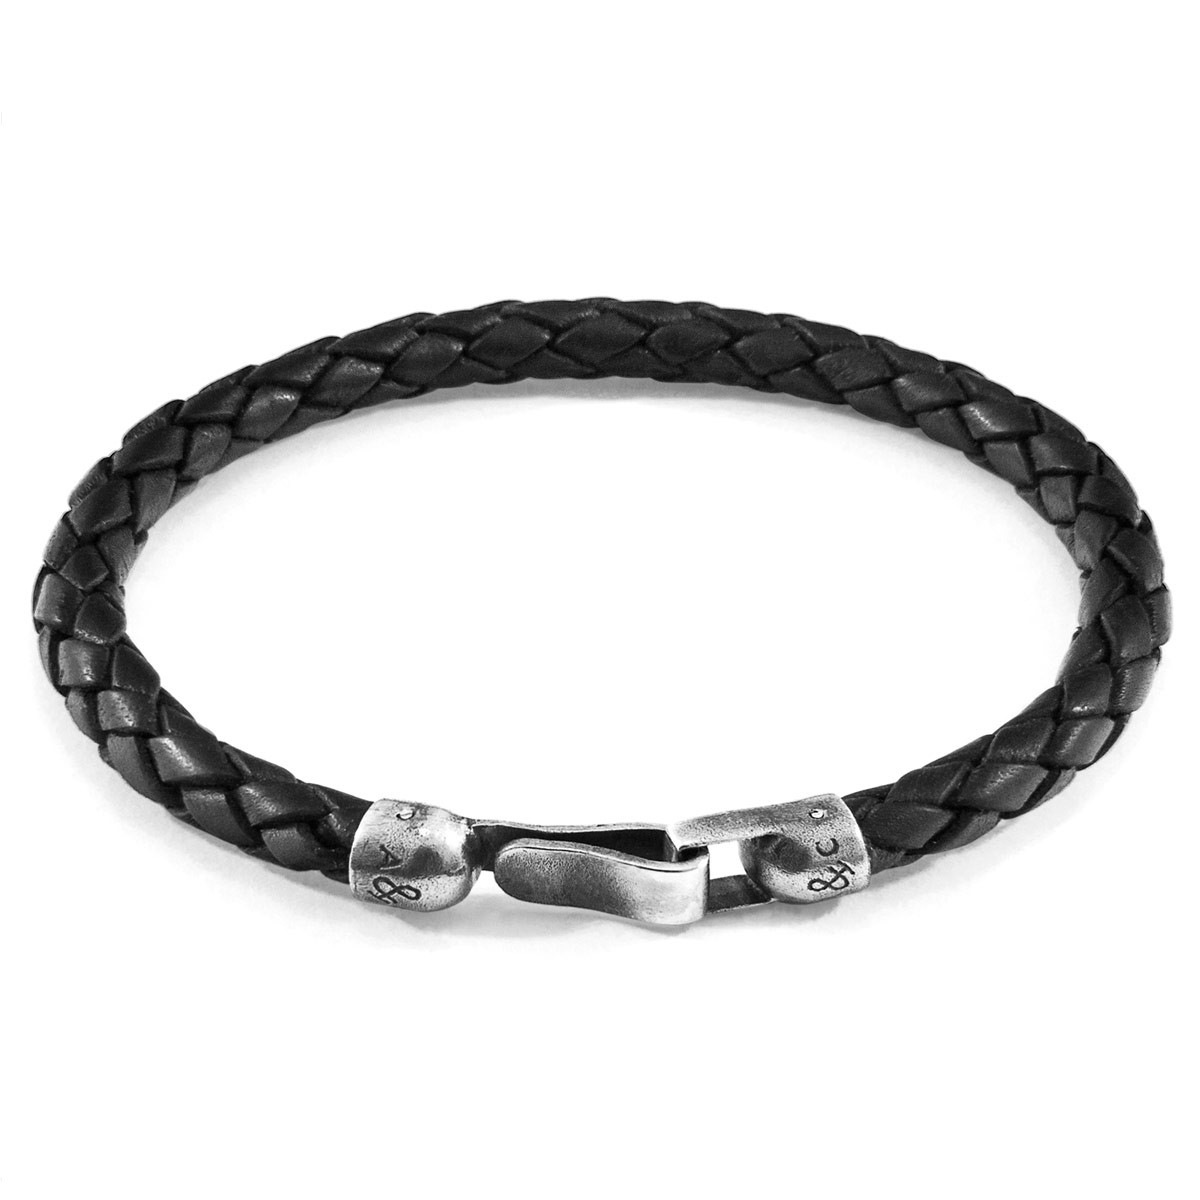 Anchor & Crew Midnight Black Skye Silver and Braided Leather Bracelet